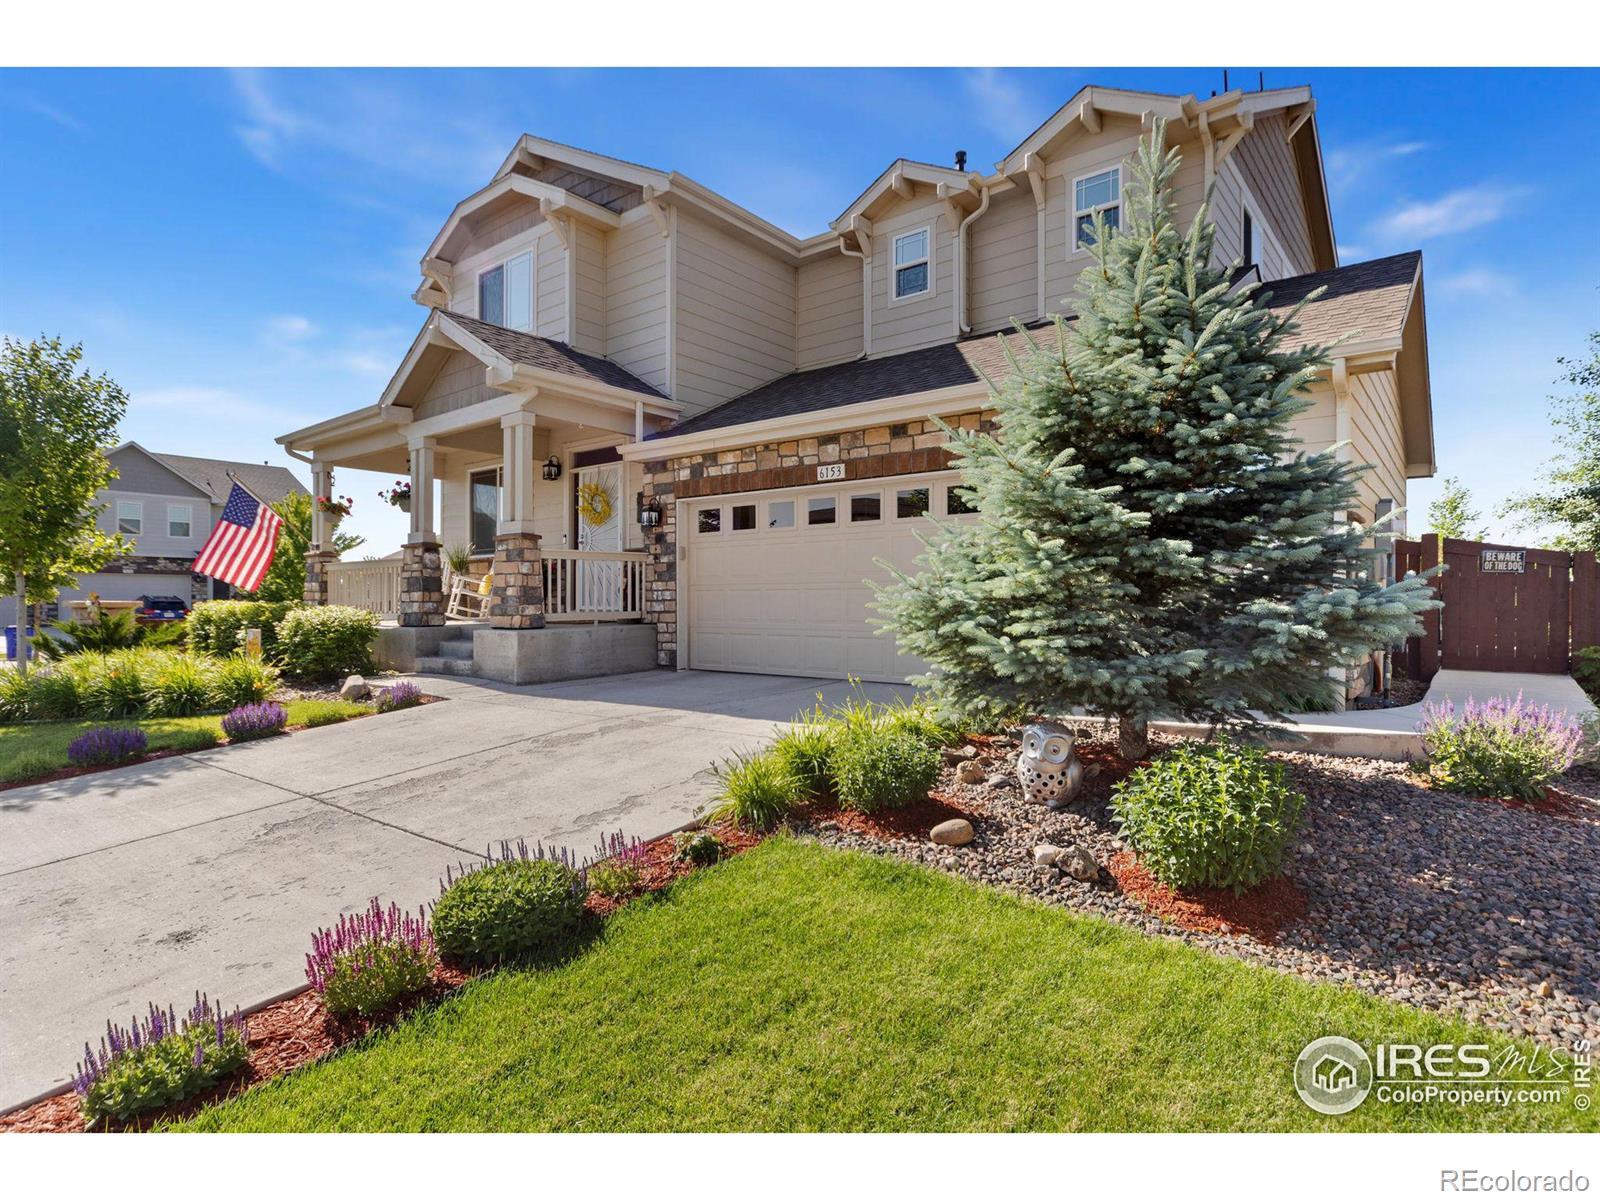 Report Image for 6153  Story Road,Timnath, Colorado